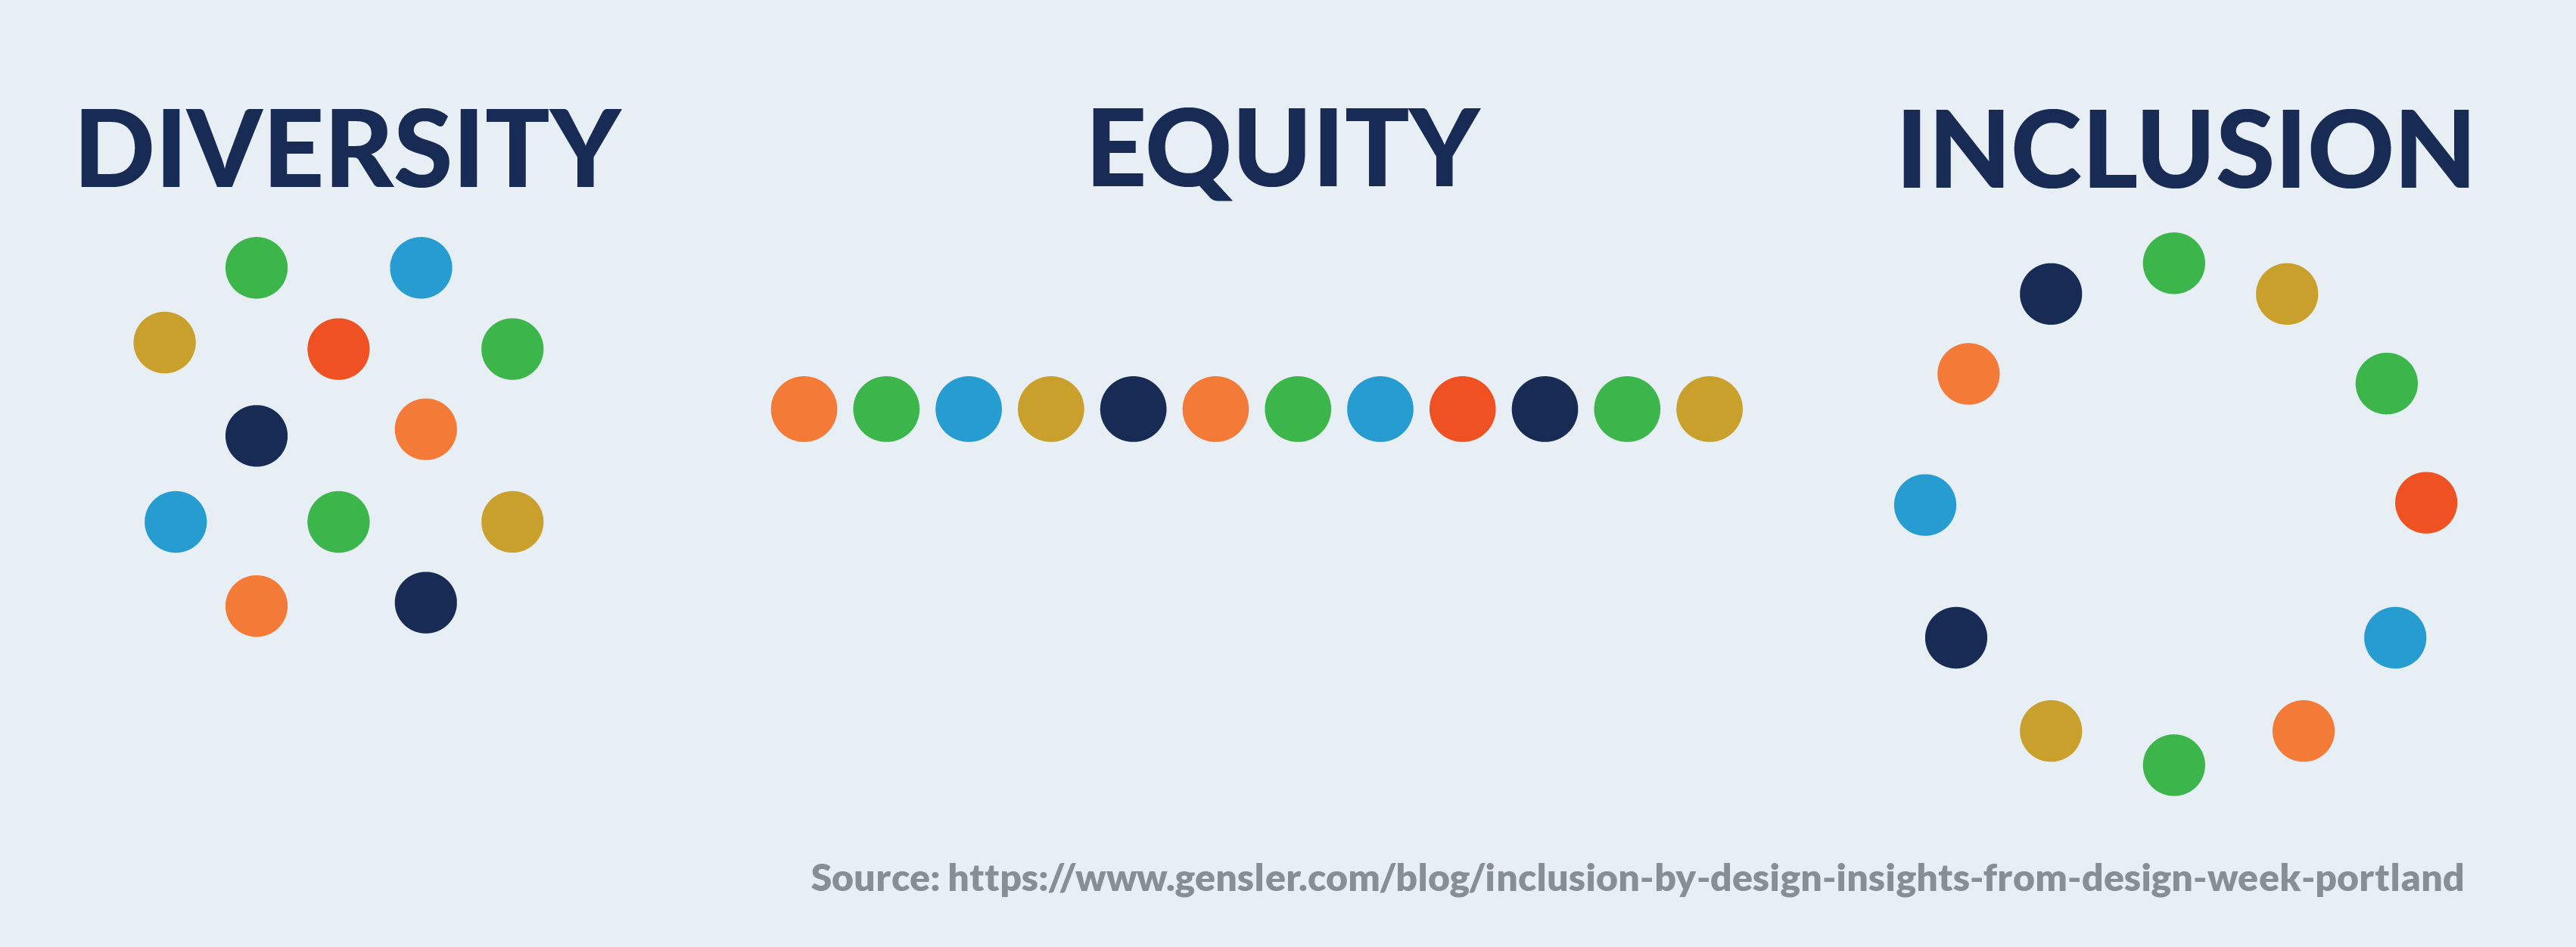 Representations of Diversity, Equity, and Inclusion